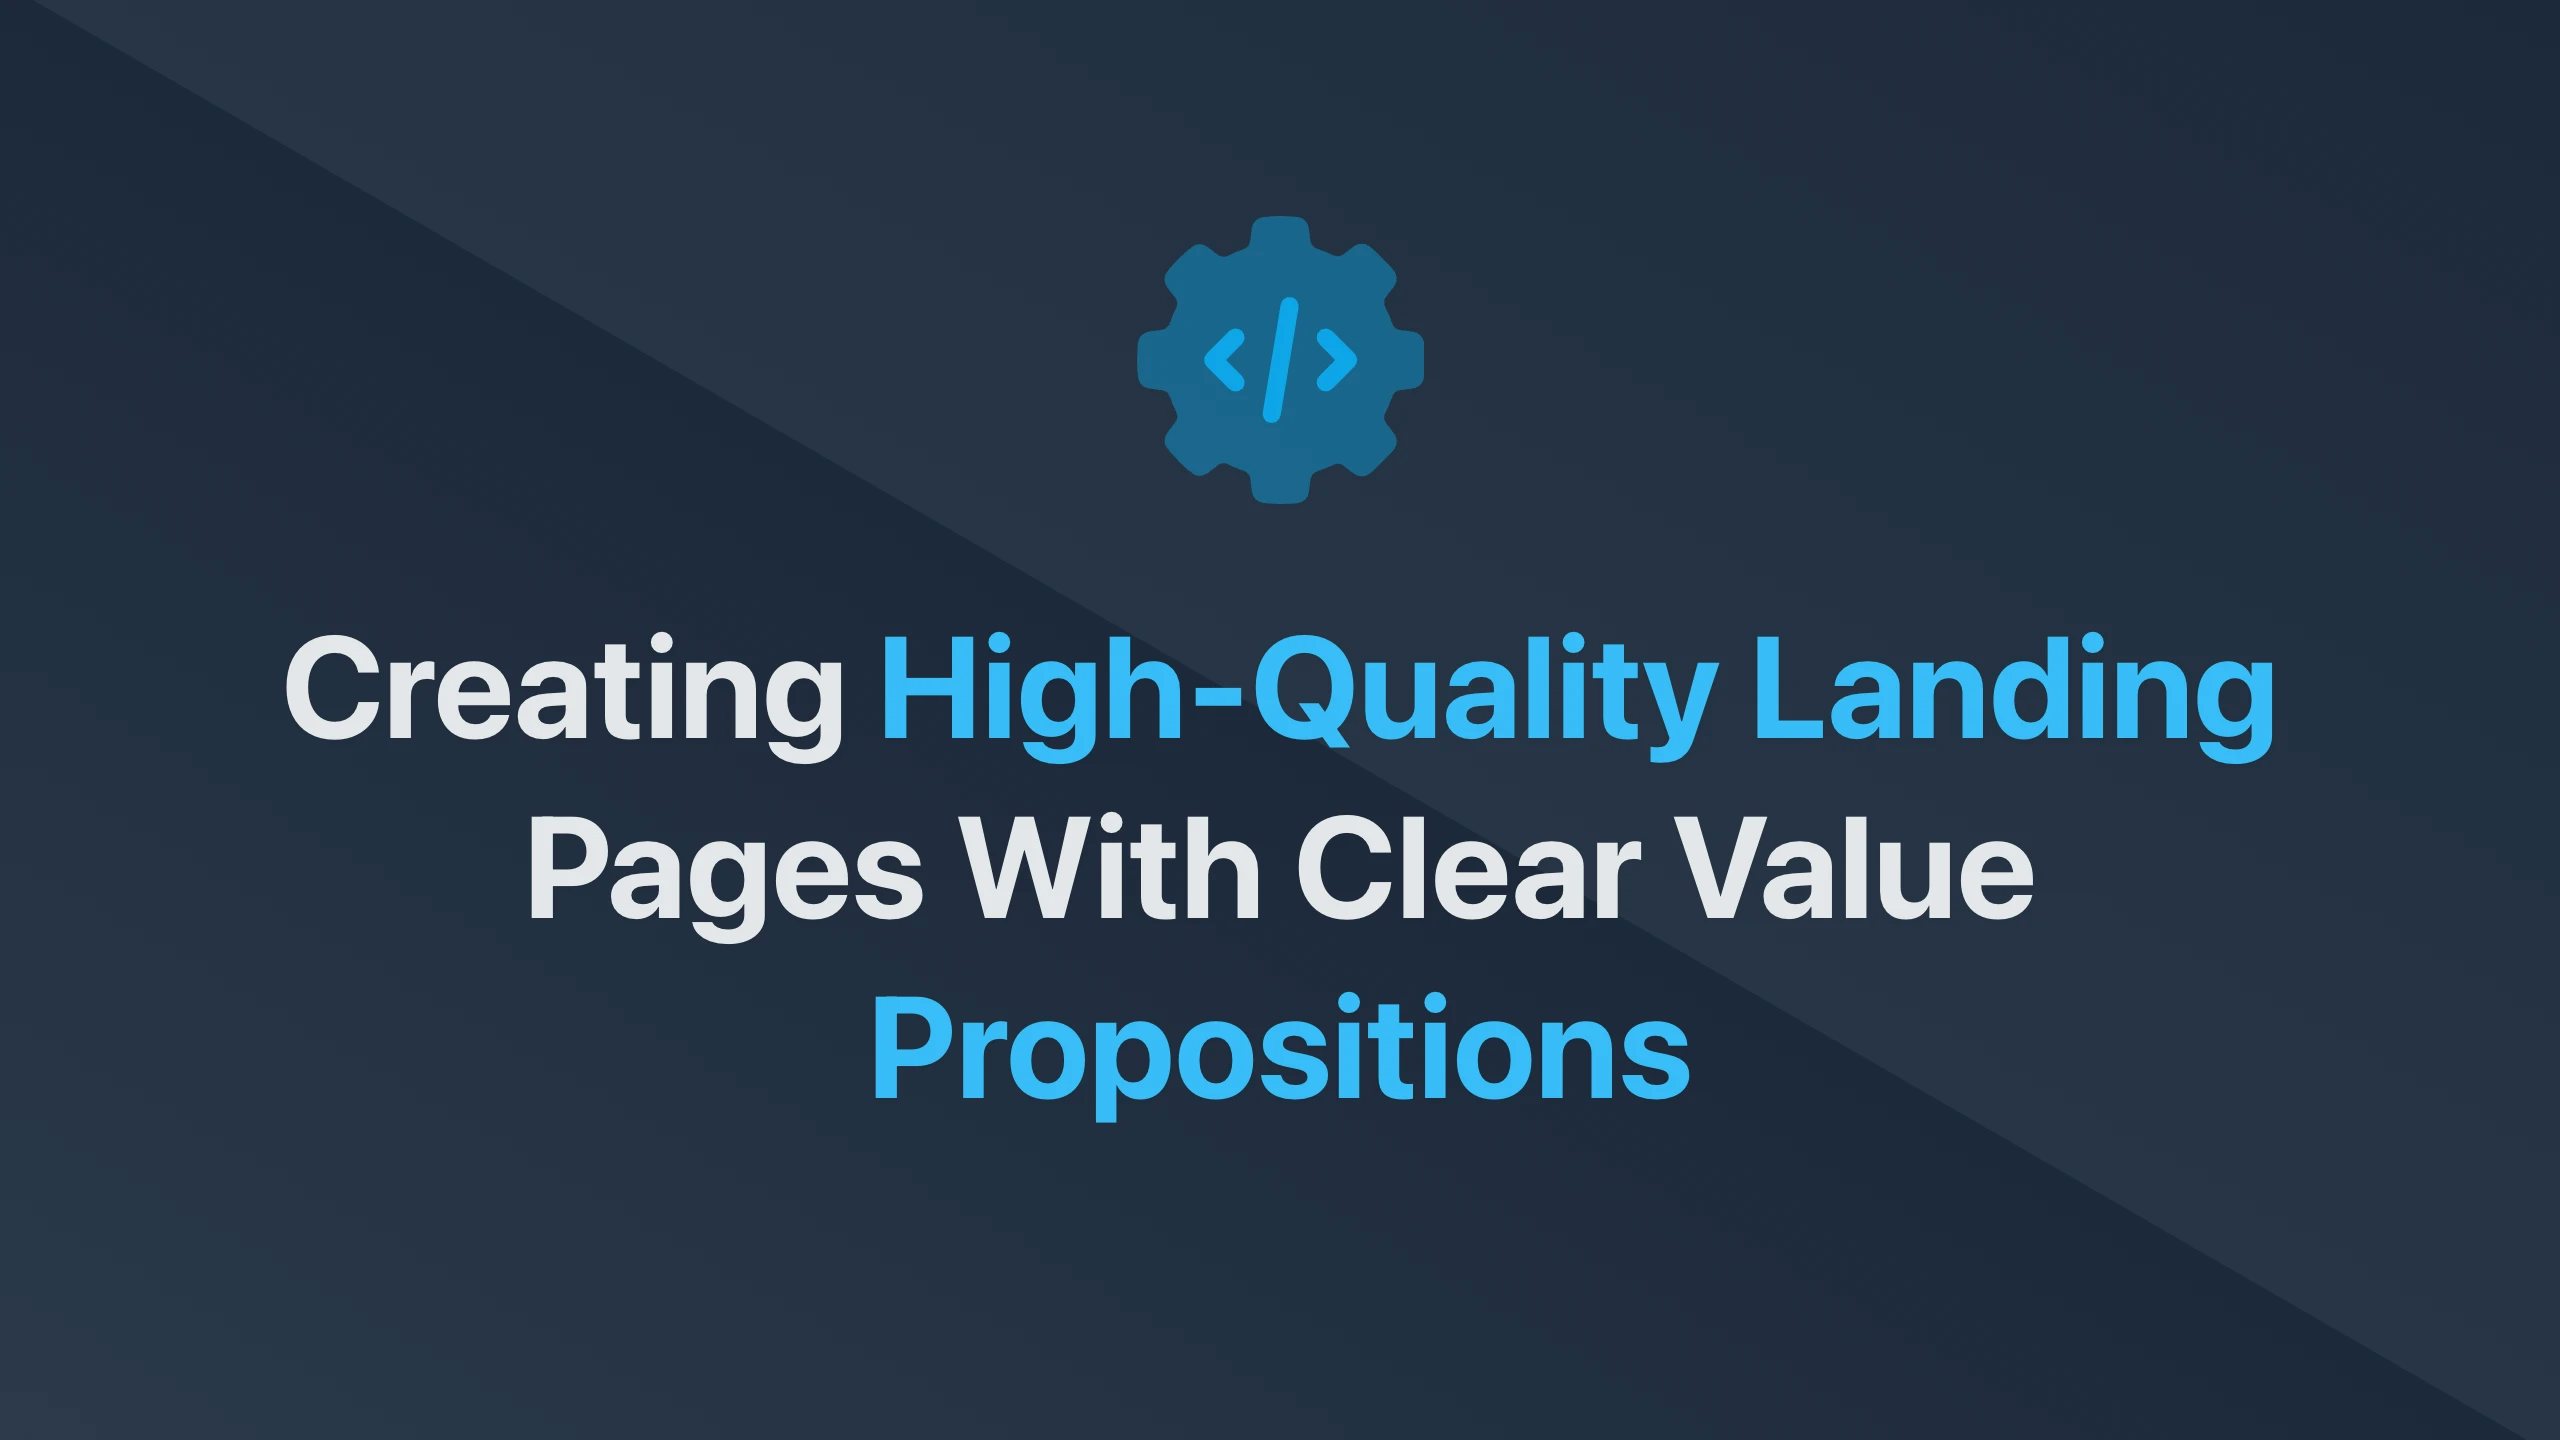 Cover Image for Creating High-Quality Landing Pages with Clear Value Propositions